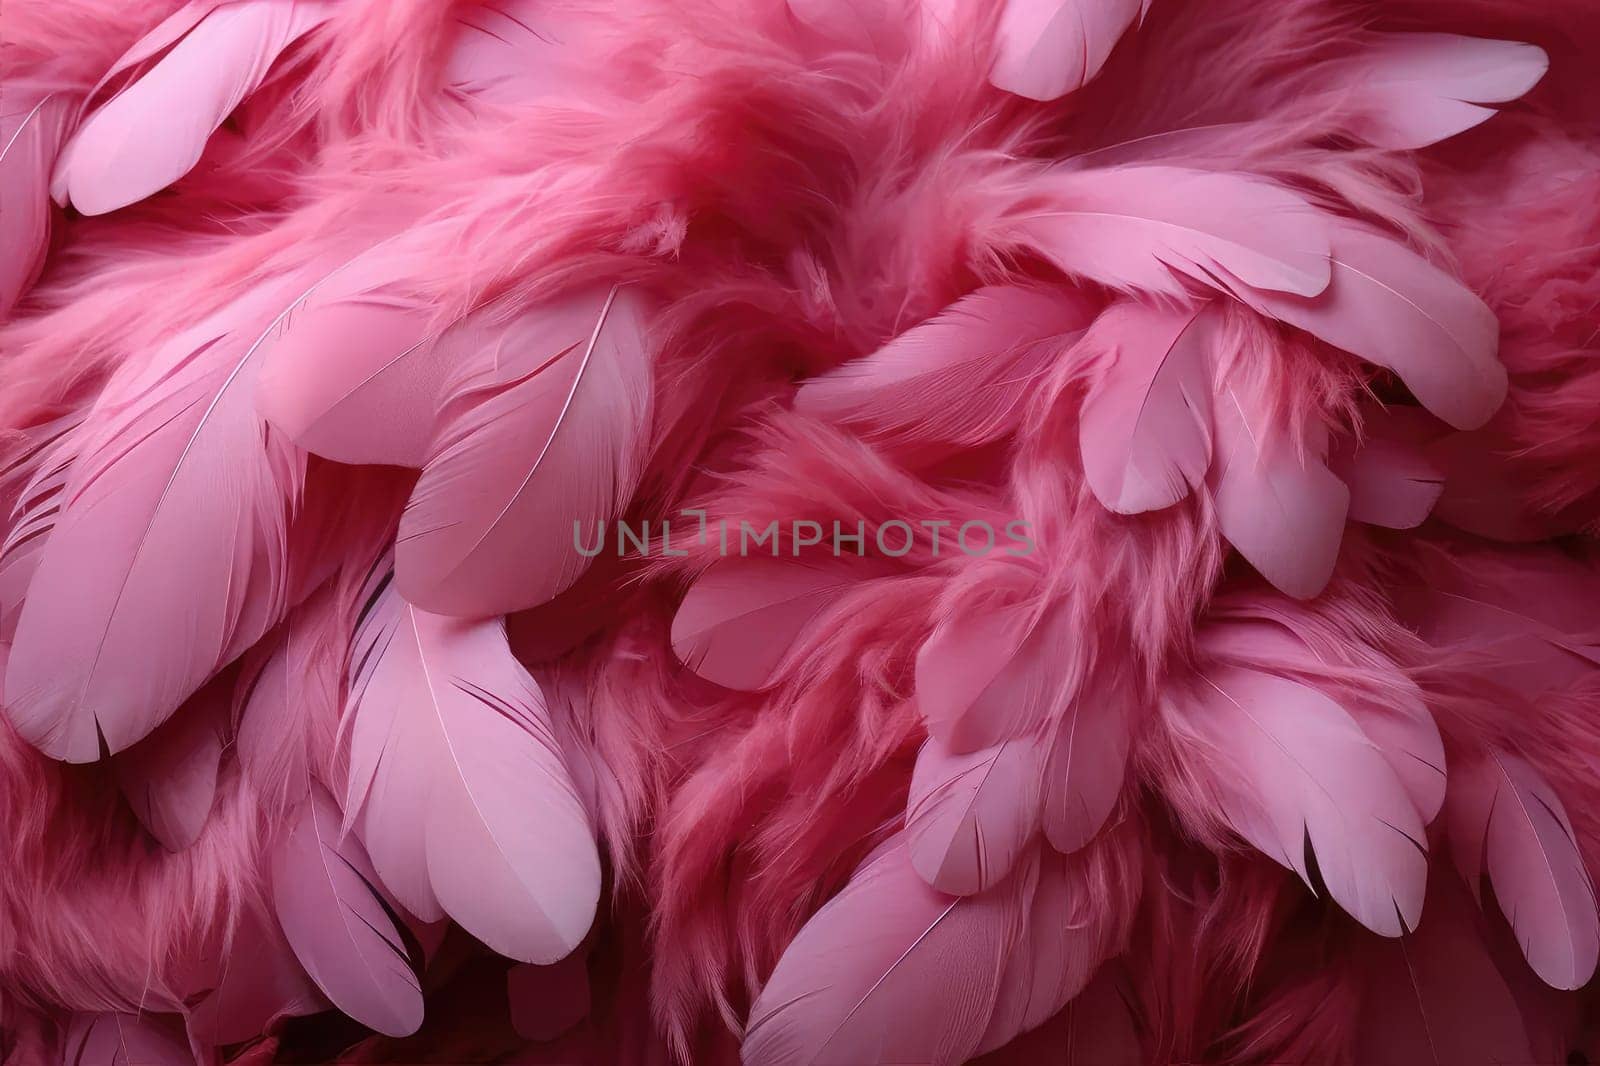 A dazzling backdrop of pink bird feathers is an inspiration for creativity. by Yurich32